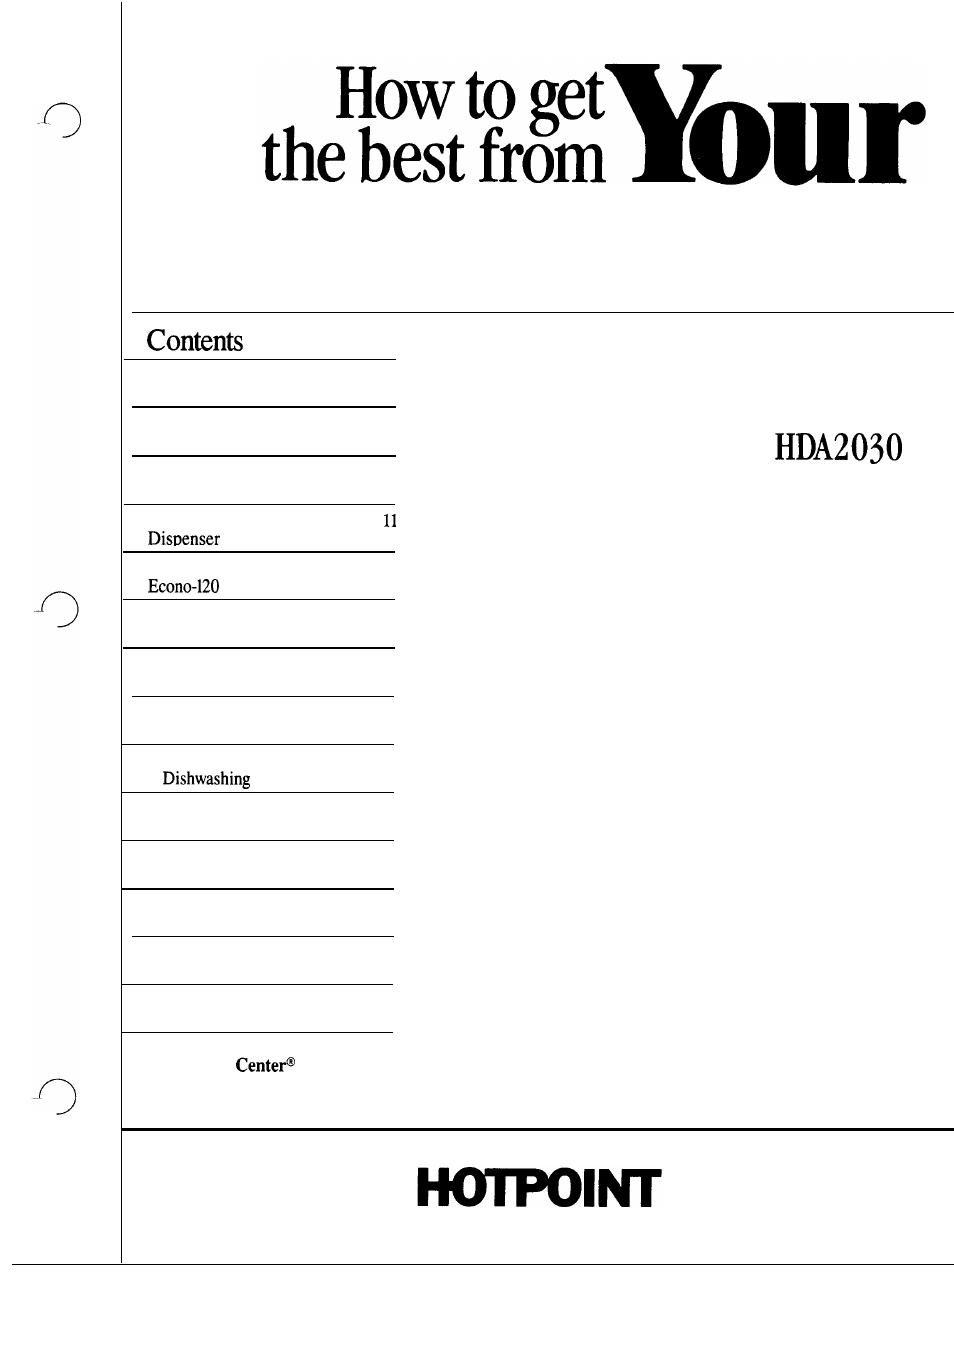 Hotpoint HDA2030 User Manual | 20 pages